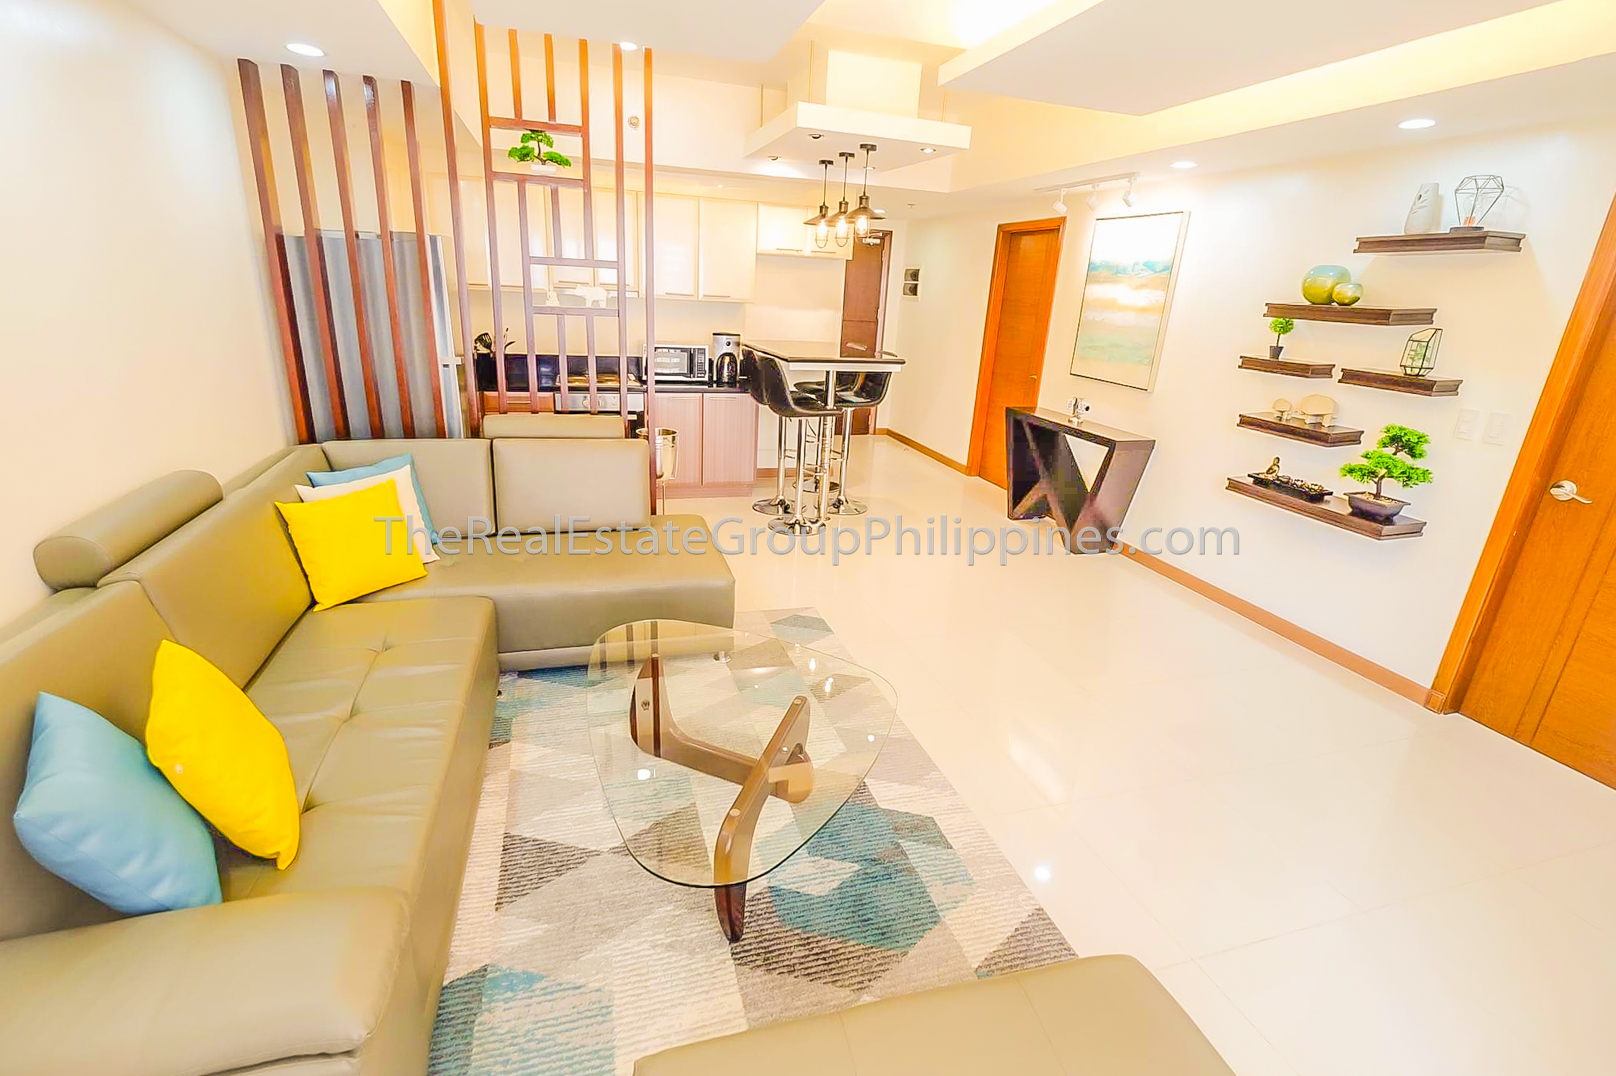 2BR Condo For Sale Venice Residences McKinley Hill Taguig (7 of 10)